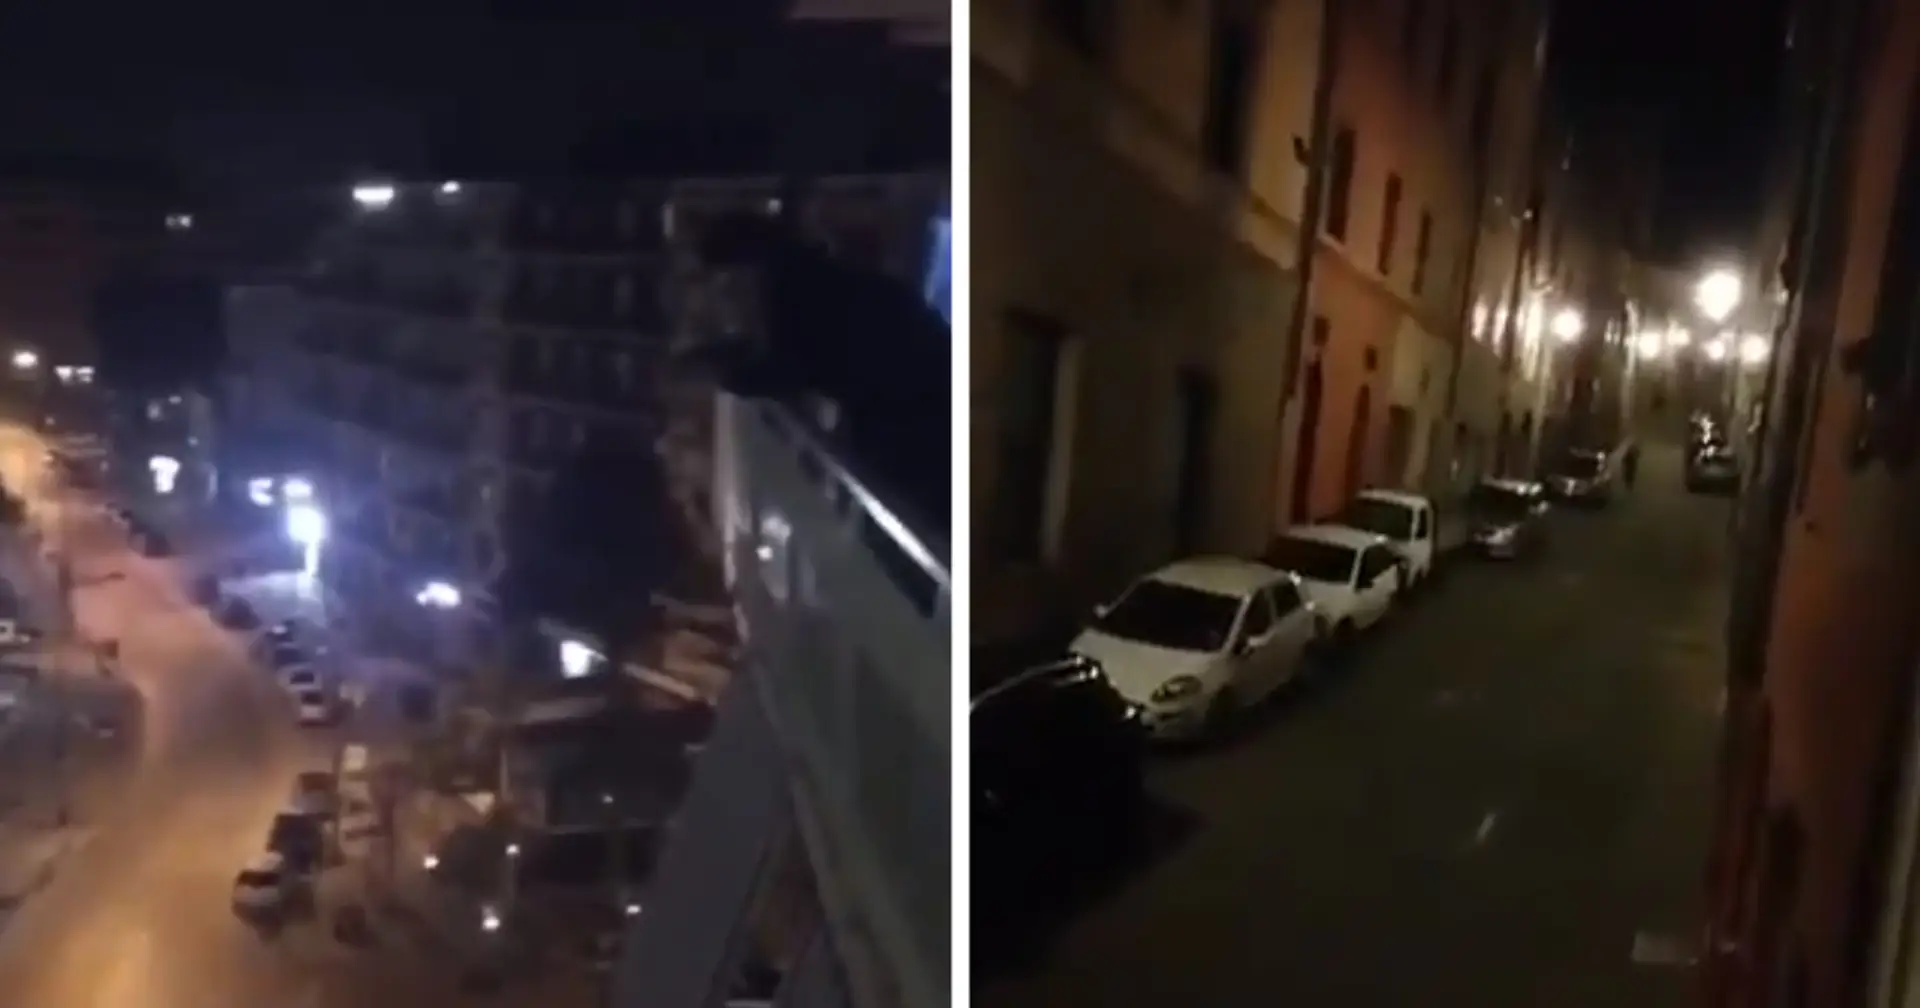 Quarantined Italians lift their spirits singing 'never give up' from balconies